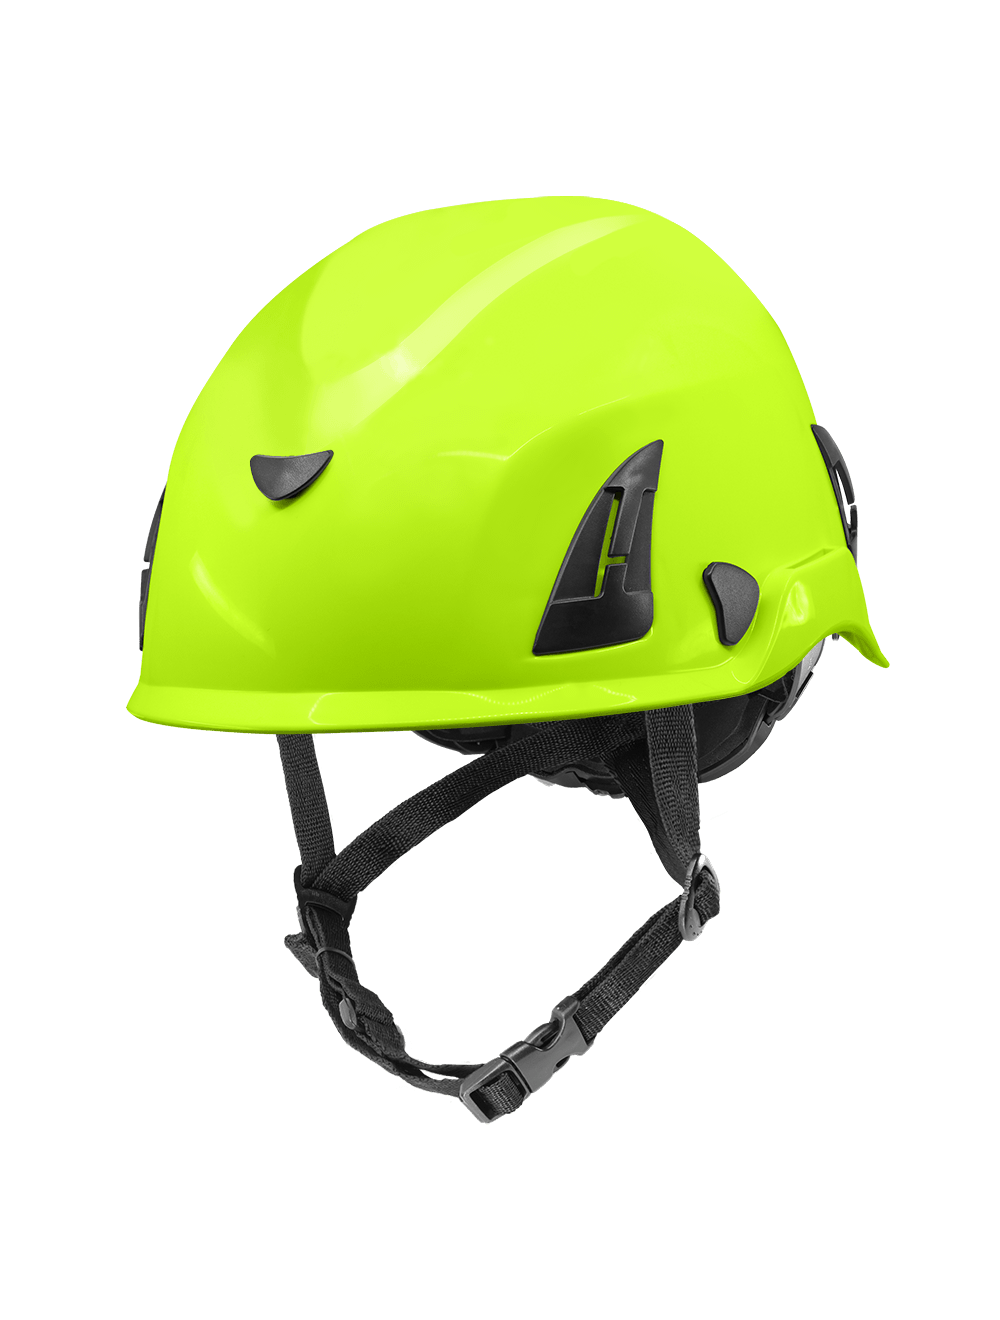 Bullhead Safety™ Head Protection - High-Visibility Yellow/Green Climbing Style Protective Helmet with Six-Point Ratchet Suspension and Four-Point Chin Strap - HH-CH1-YG